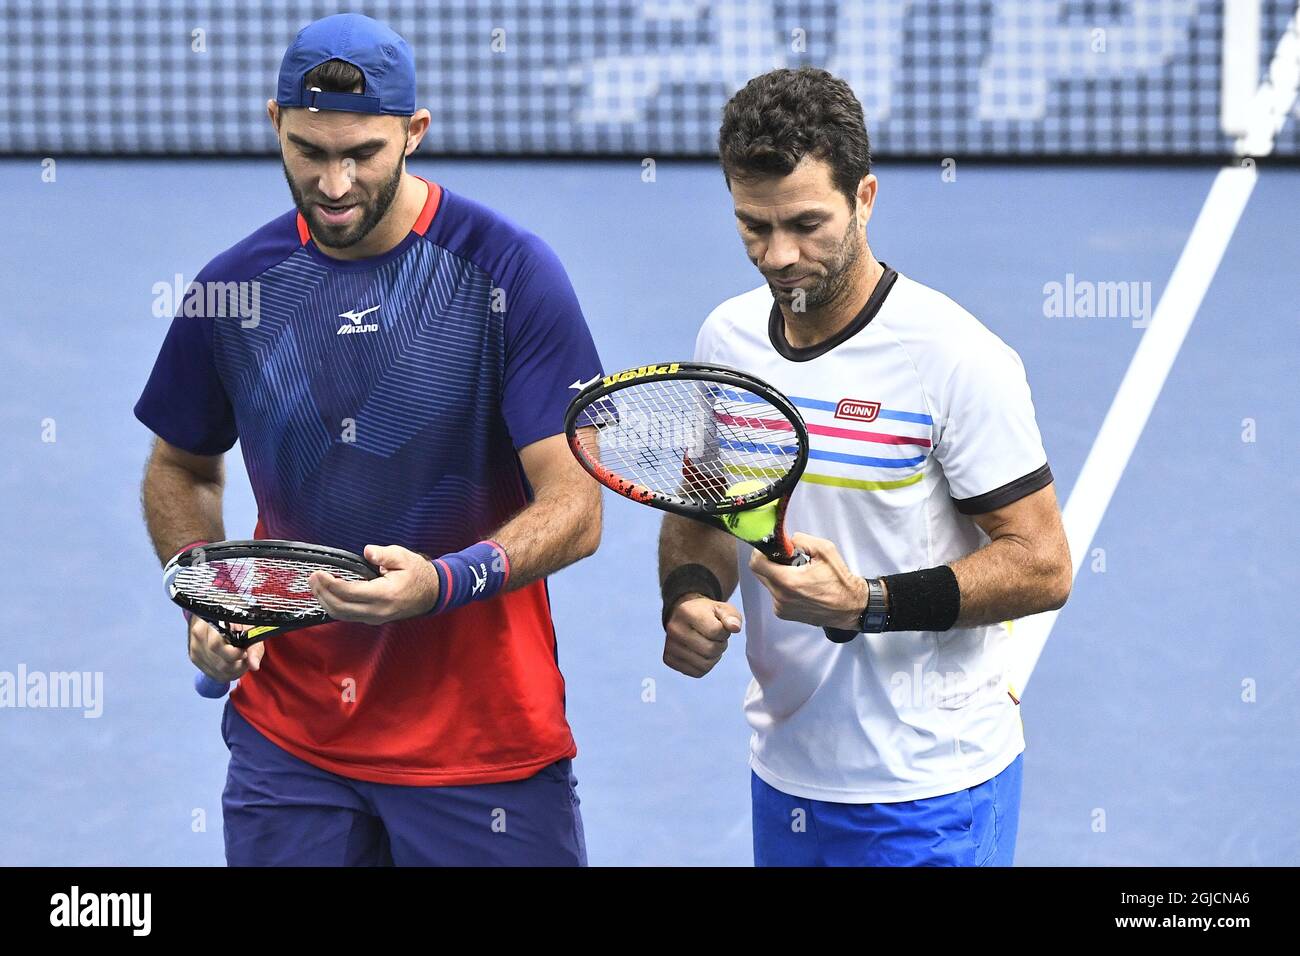 Horia Tecau (ROU) and Jean-Julien Rojer (NED) during the men's doubles semi  final at the ATP Stockholm Open tennis tournament at the Royal Tennis Hall  in Stockholm, Sweden, October 19 2018, Photo: